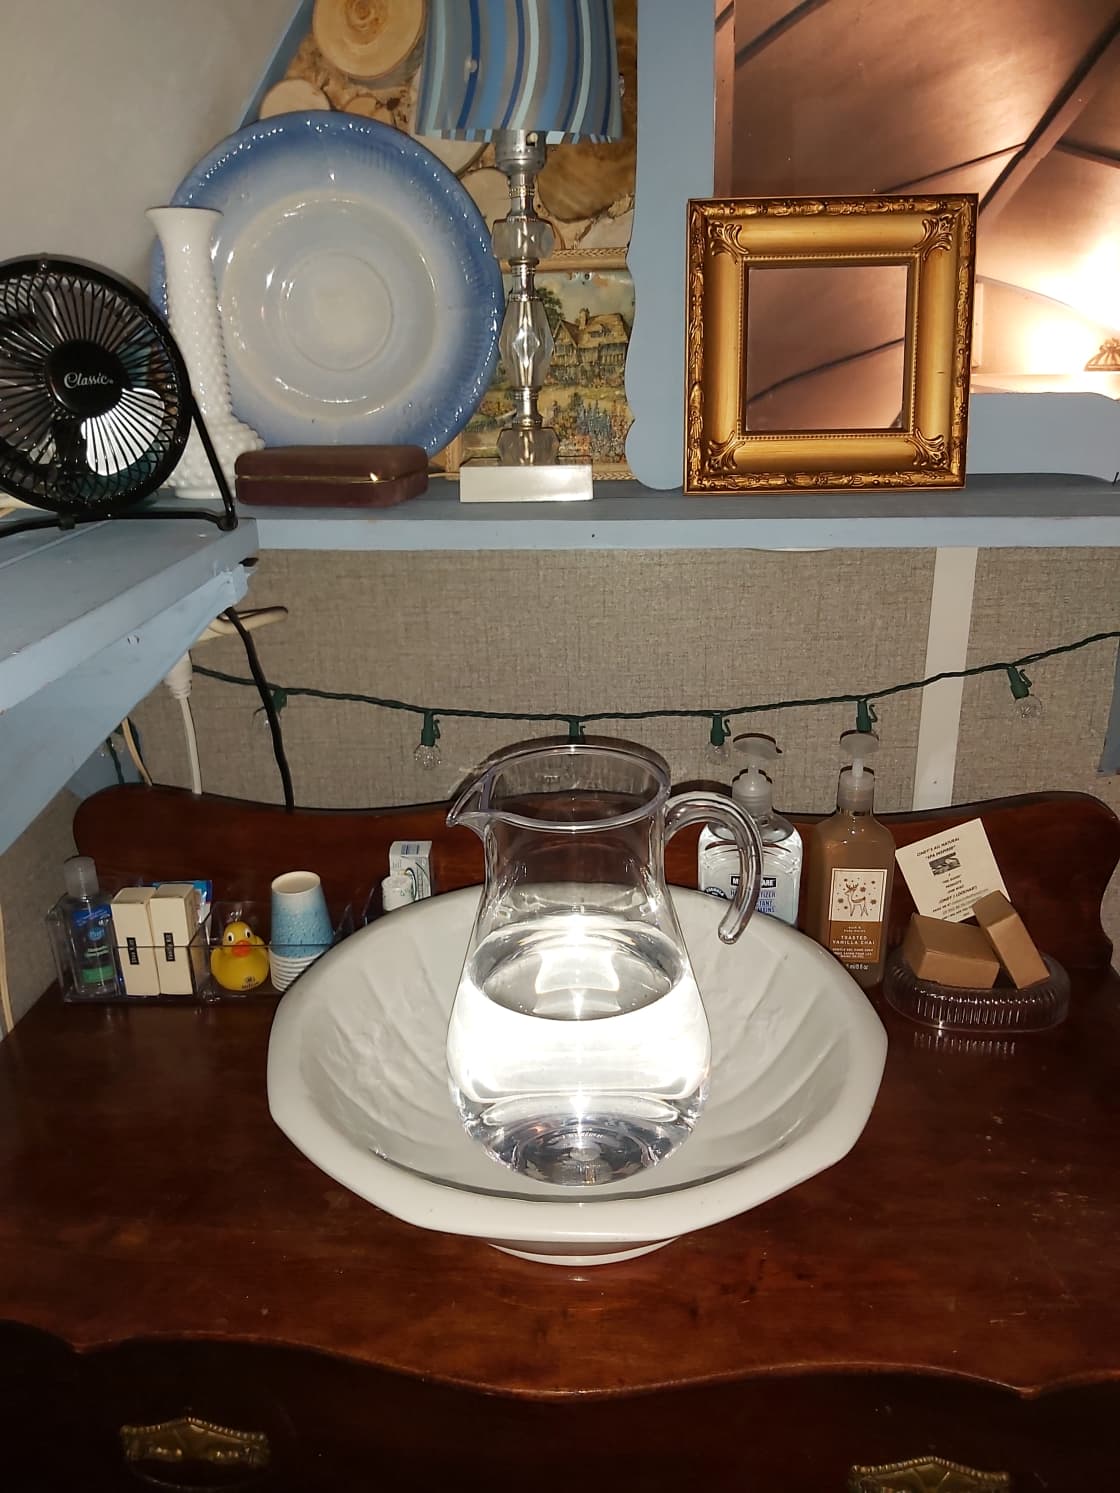 Freshen up by using this antique wash basin.  Water, soap, washcloths, and hand towels are provided.  You may also wash up in one of the fancy outhouses.